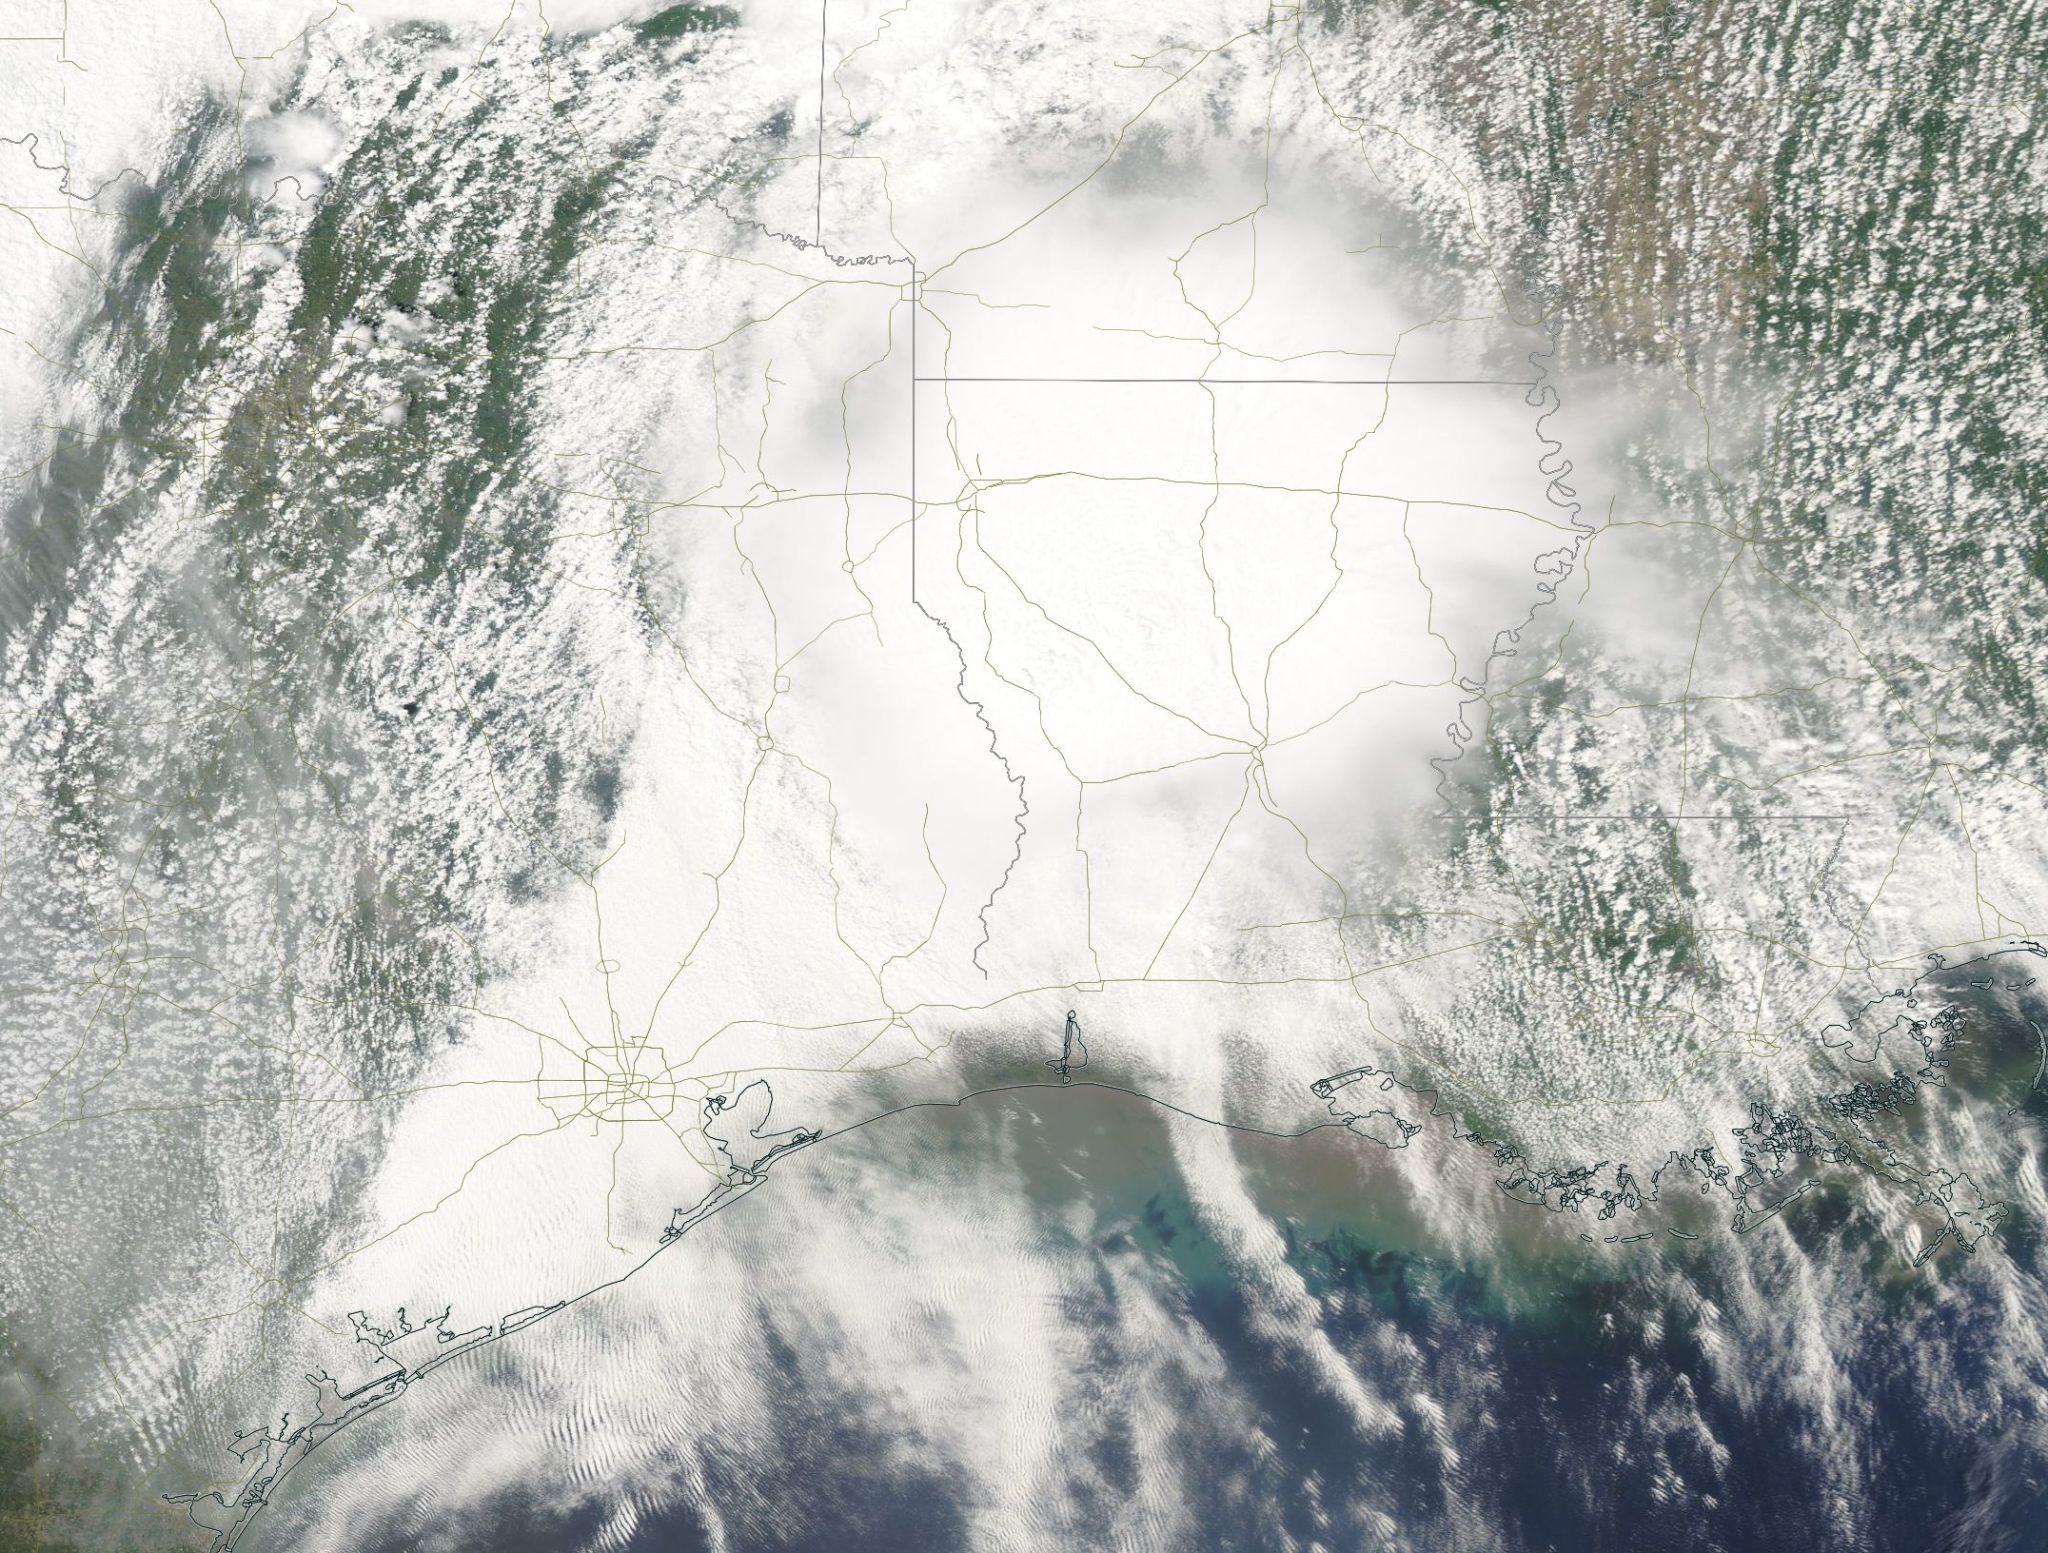 Aqua satellite view of storm system over Texas and Louisiana